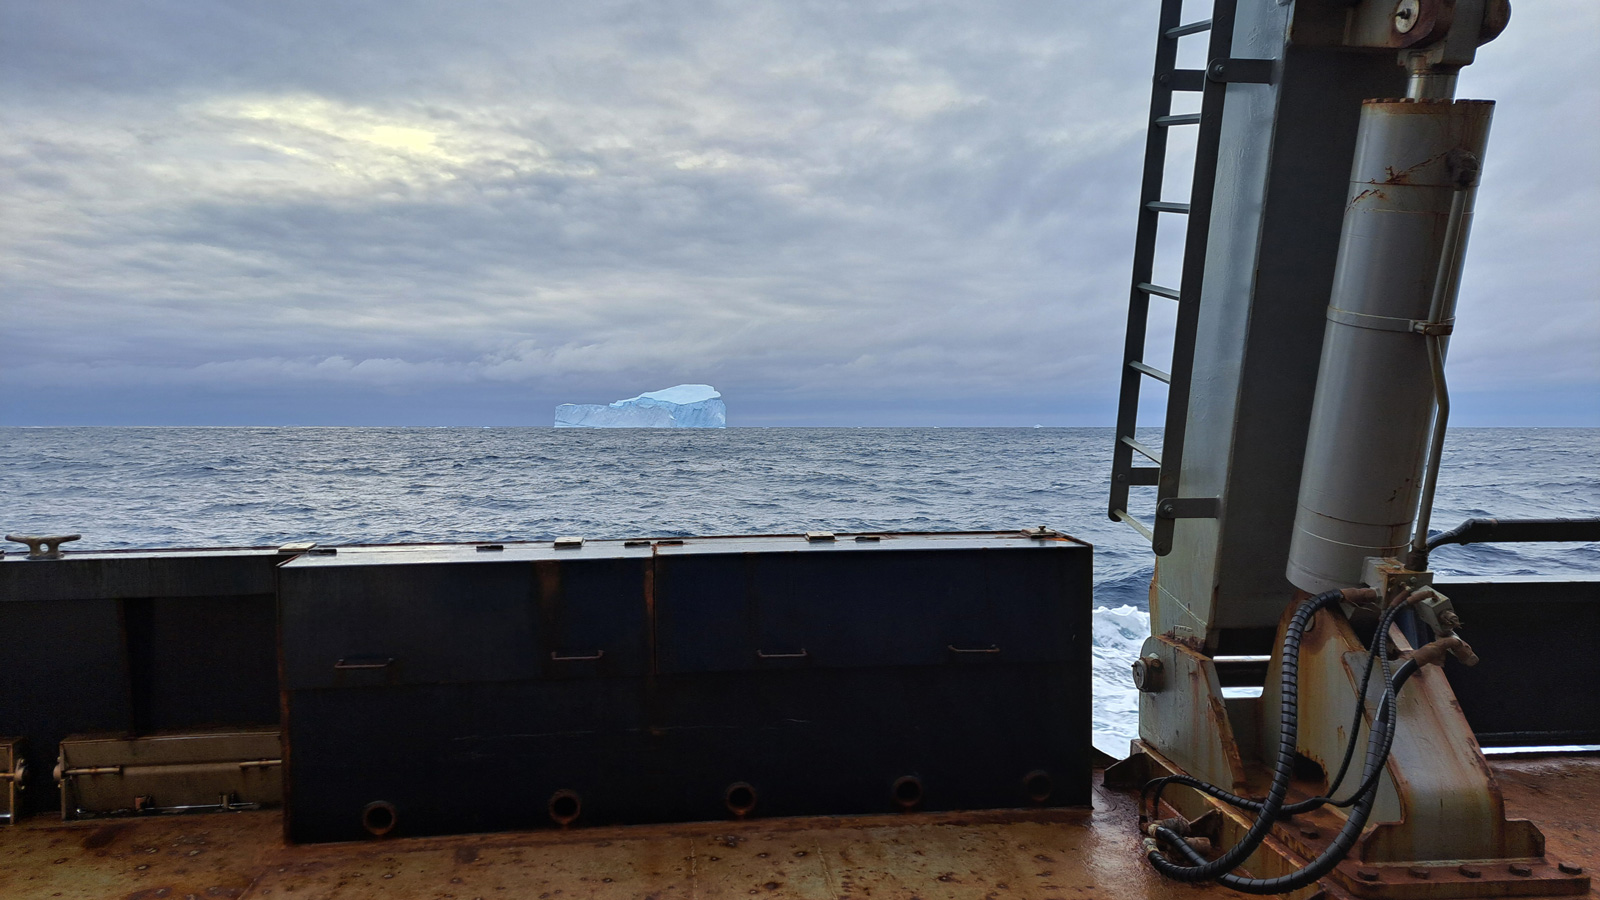 A blue and white iceberg at the center of the photo in the open blue ocean taken from the side of the R/V Marcus Langseth with the rusty gunnel and white crane at the bottom and right of the photo